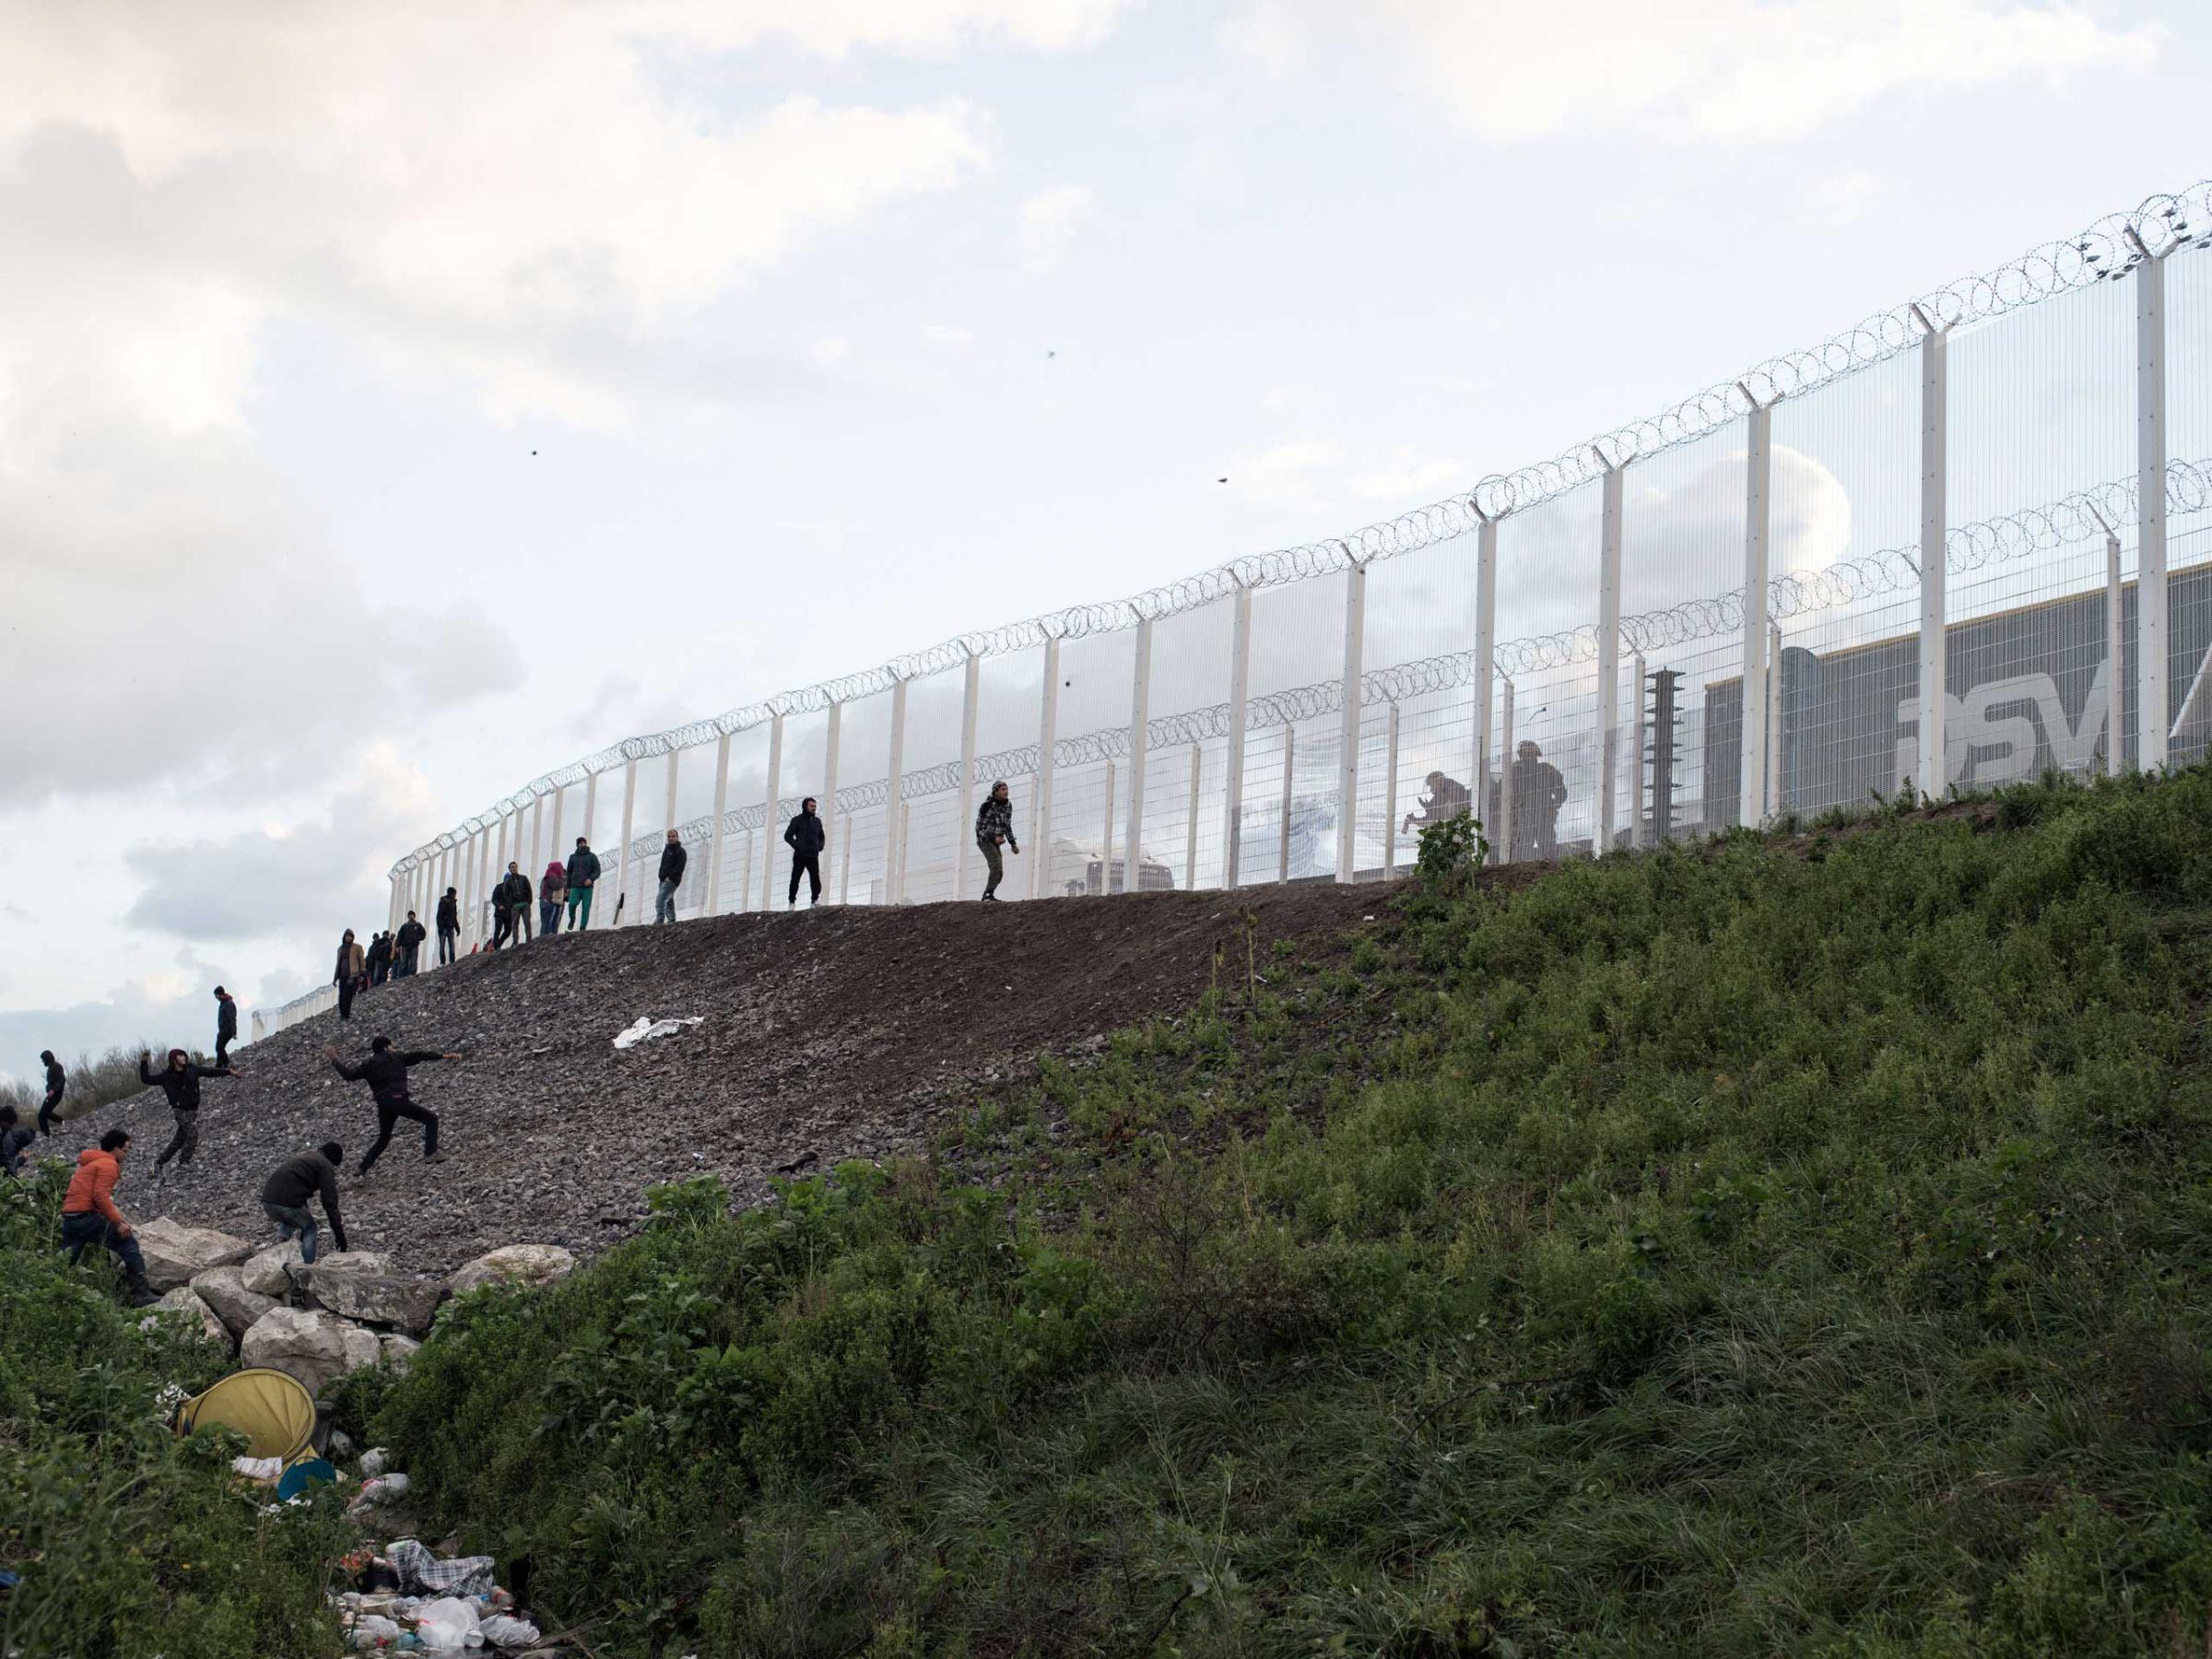 Clashes between migrants from the "jungle" in Calais, France and police have increased in frequency, Nov. 25. 2015.